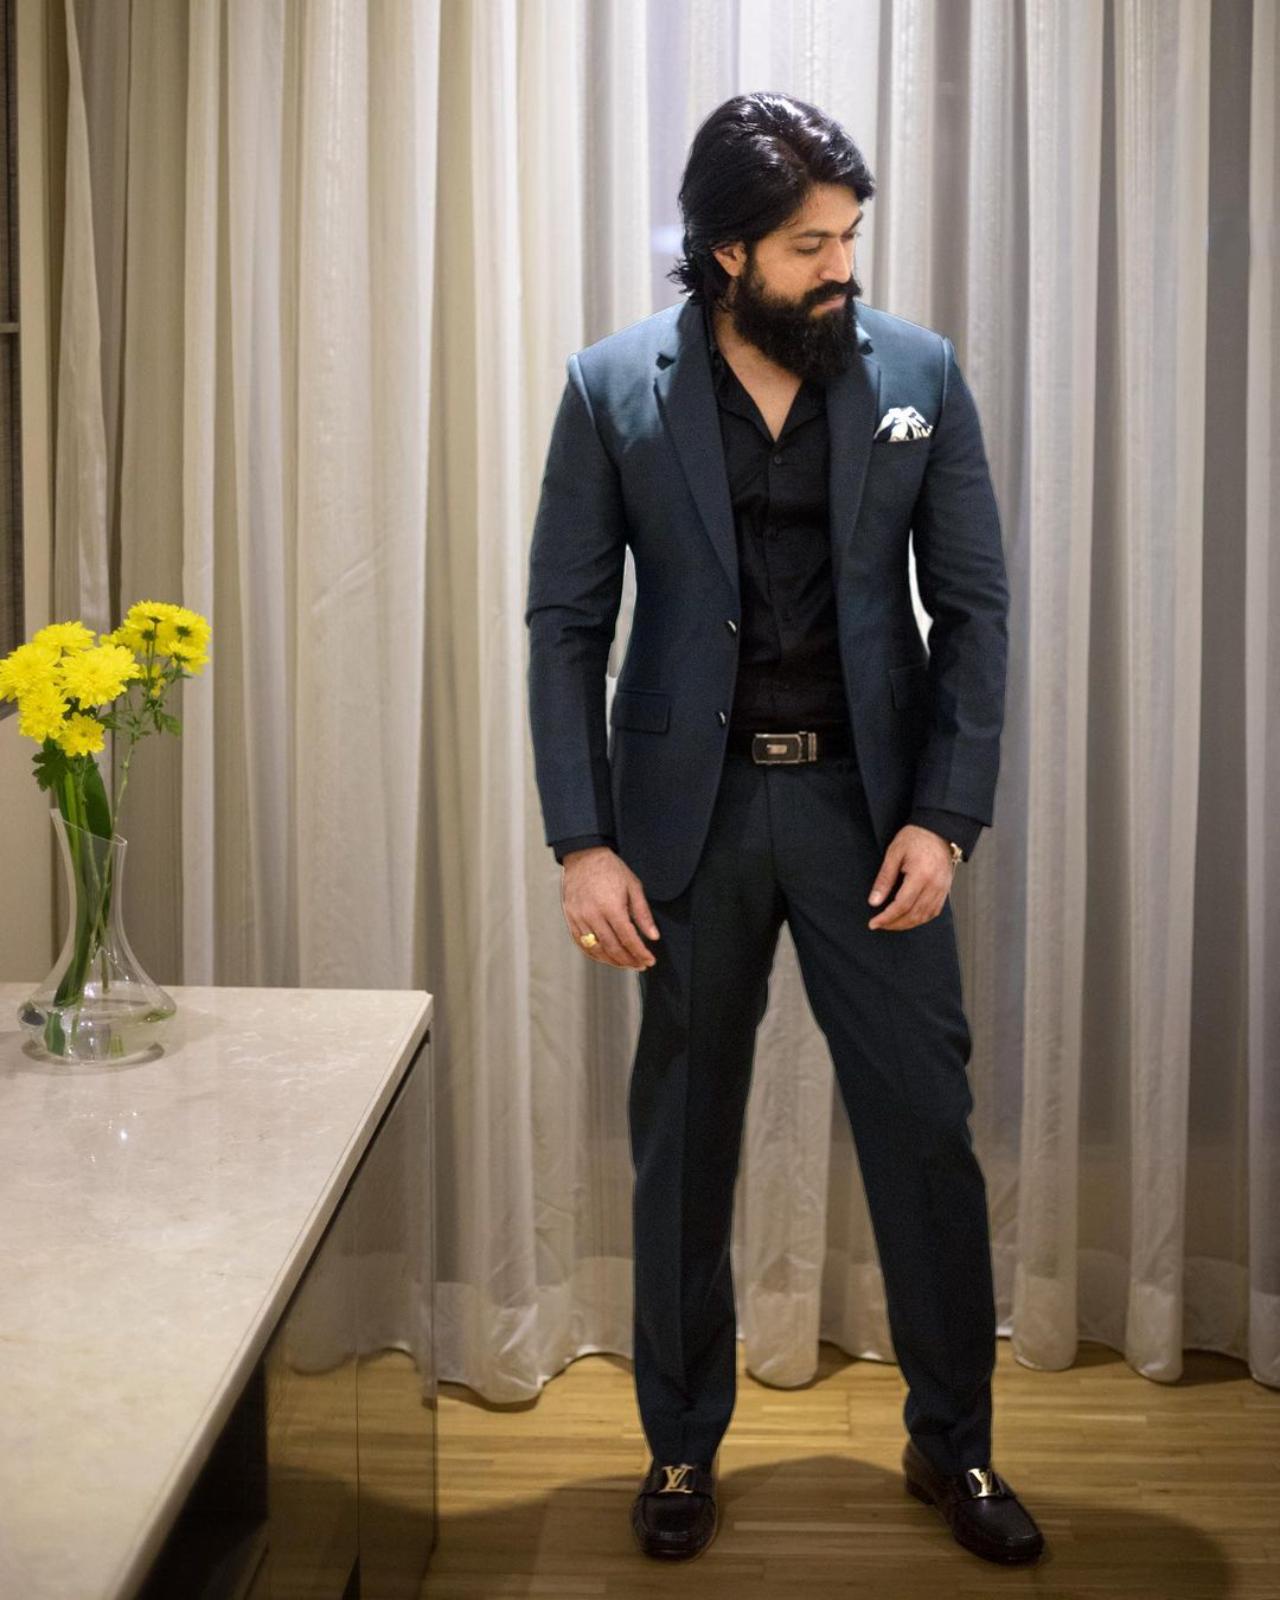 The 'Raja Huli' actor appeared nothing short of dapper in this grey-blue tuxedo paired with a black shirt. The little pops of gold glimmering from his belt, shoes and the rings on his fingers complete his classic superstar look